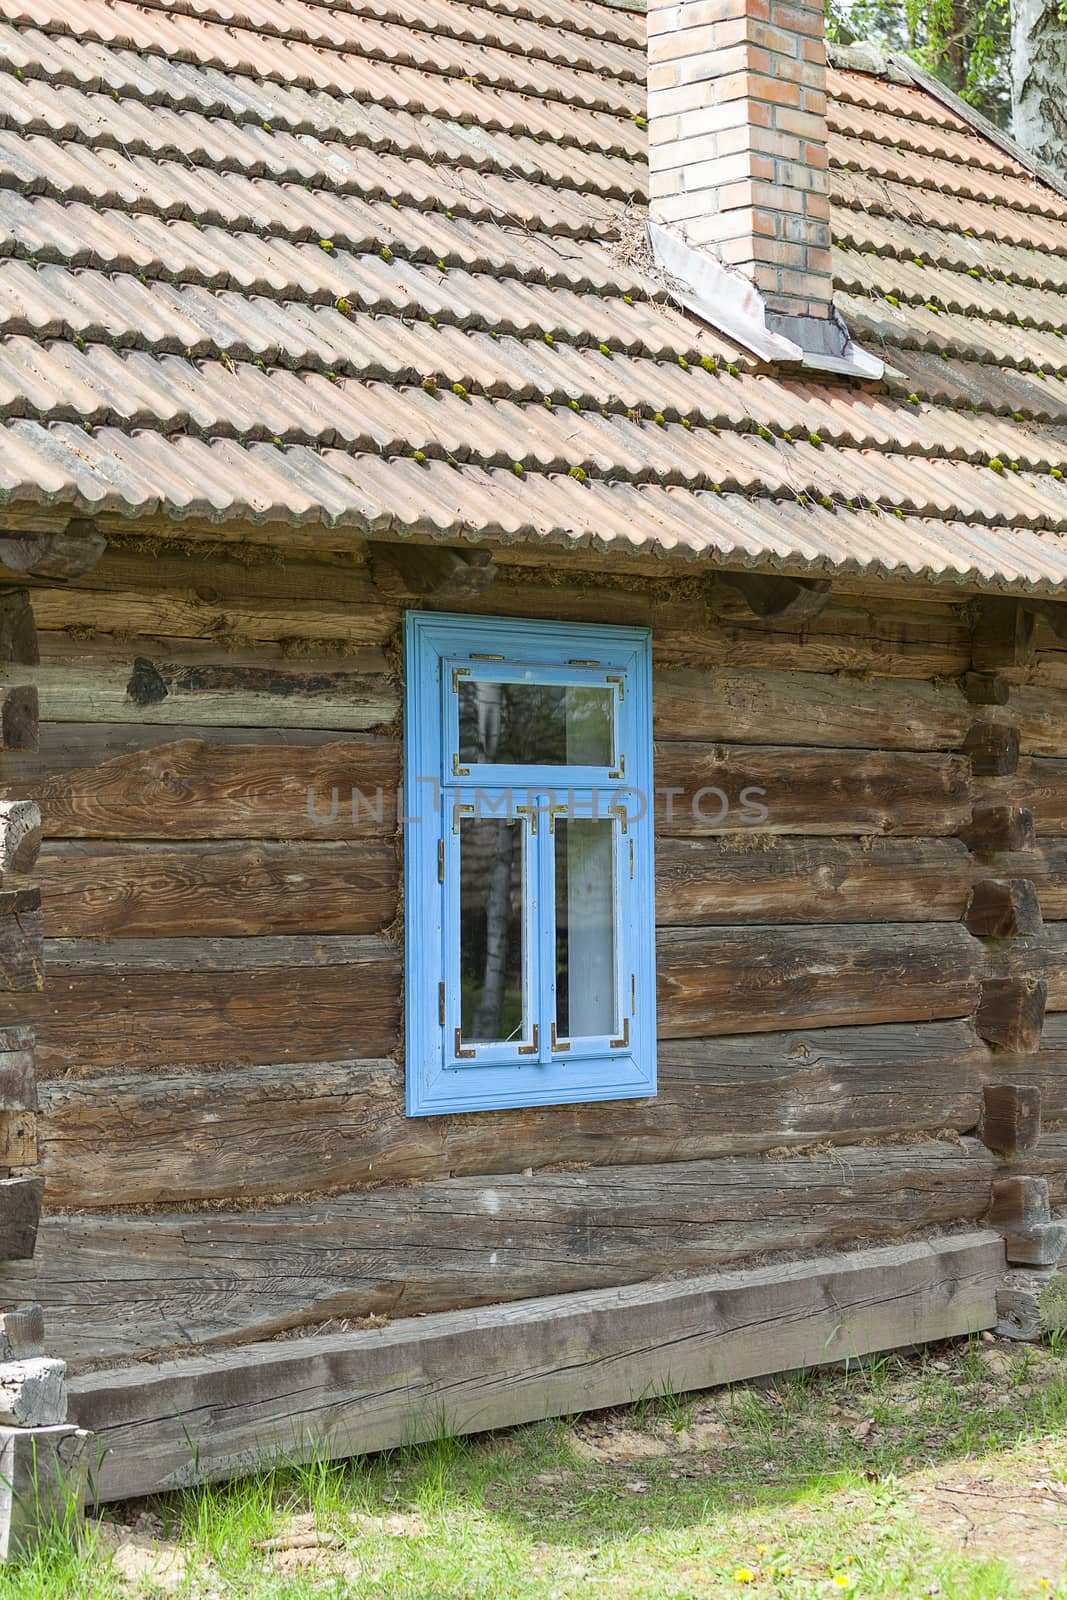 old traditional wooden polish cottage with blue window in open-air museum, Ethnographic Park, Kolbuszowa, Poland